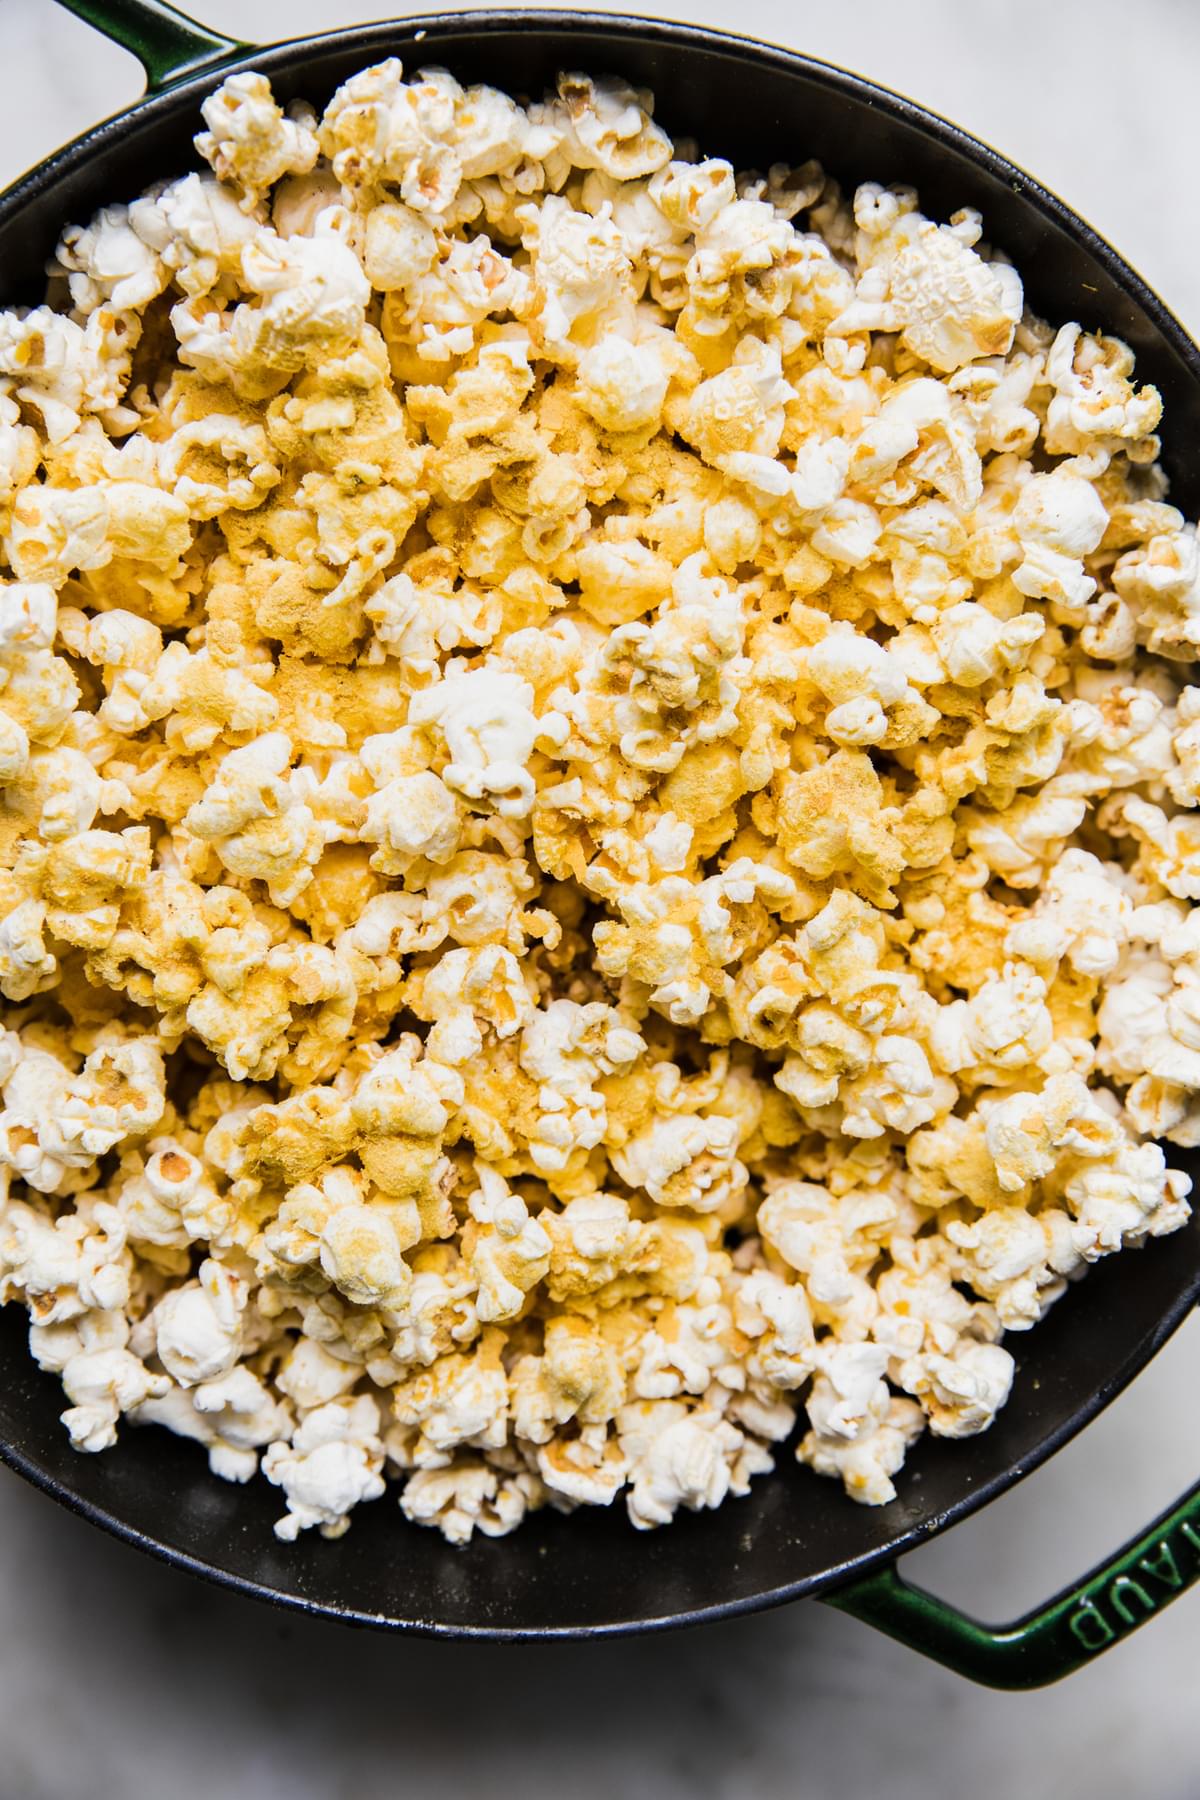 a dutch oven full of homemade popcorn seasoned with butter, salt and nutritional yeast